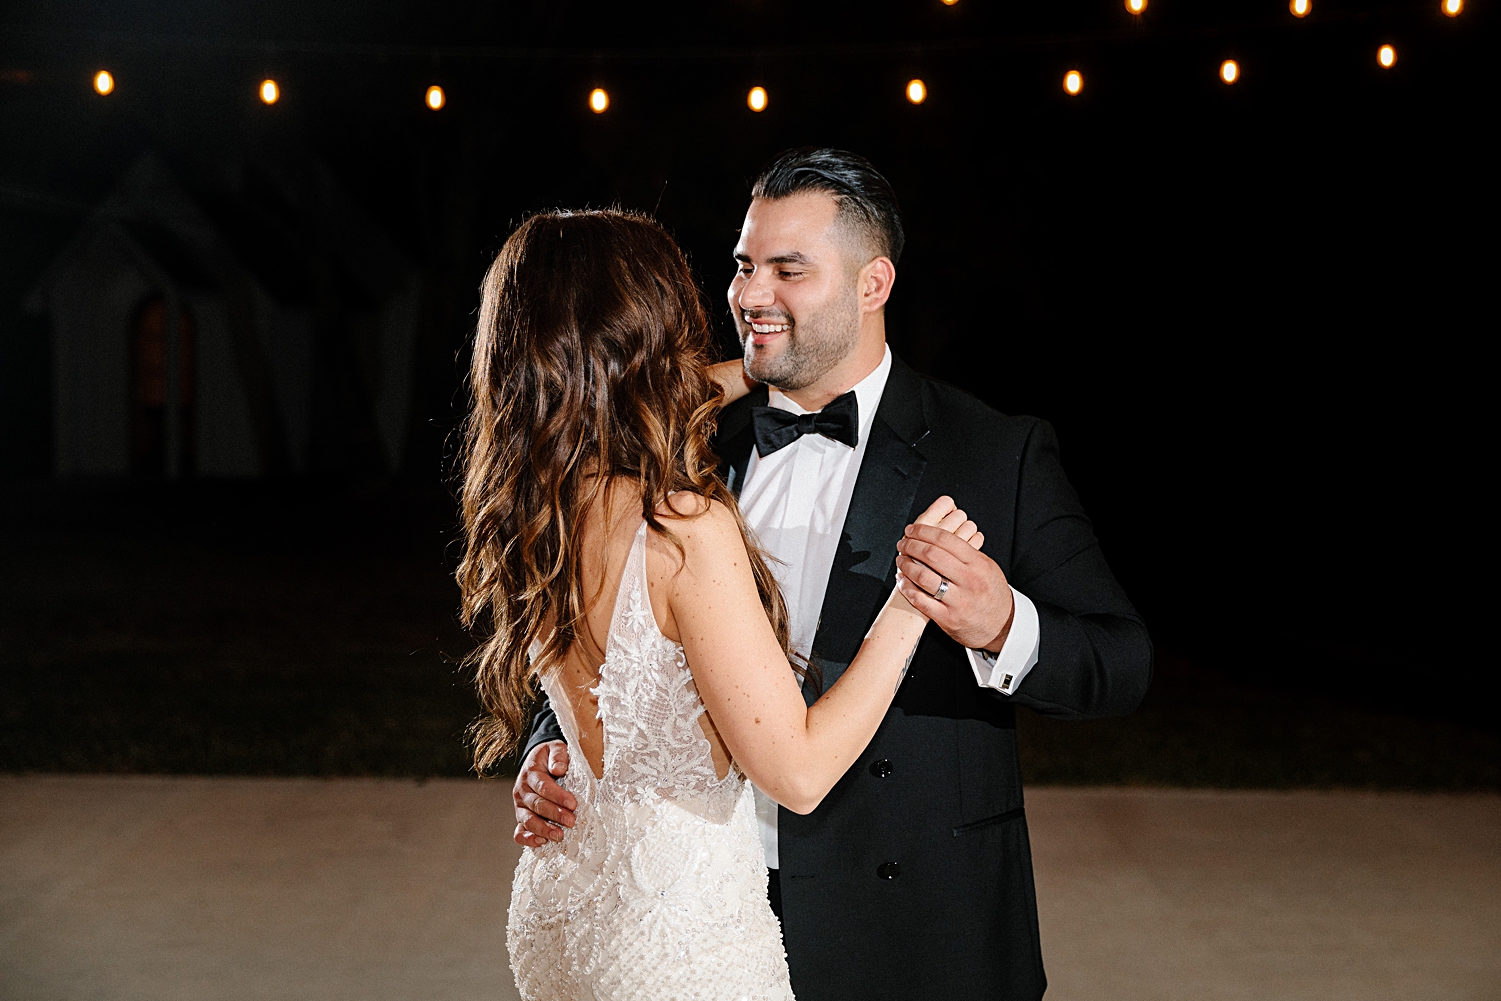 bride and groom dancing at night under string lights Emerson Venue Wedding